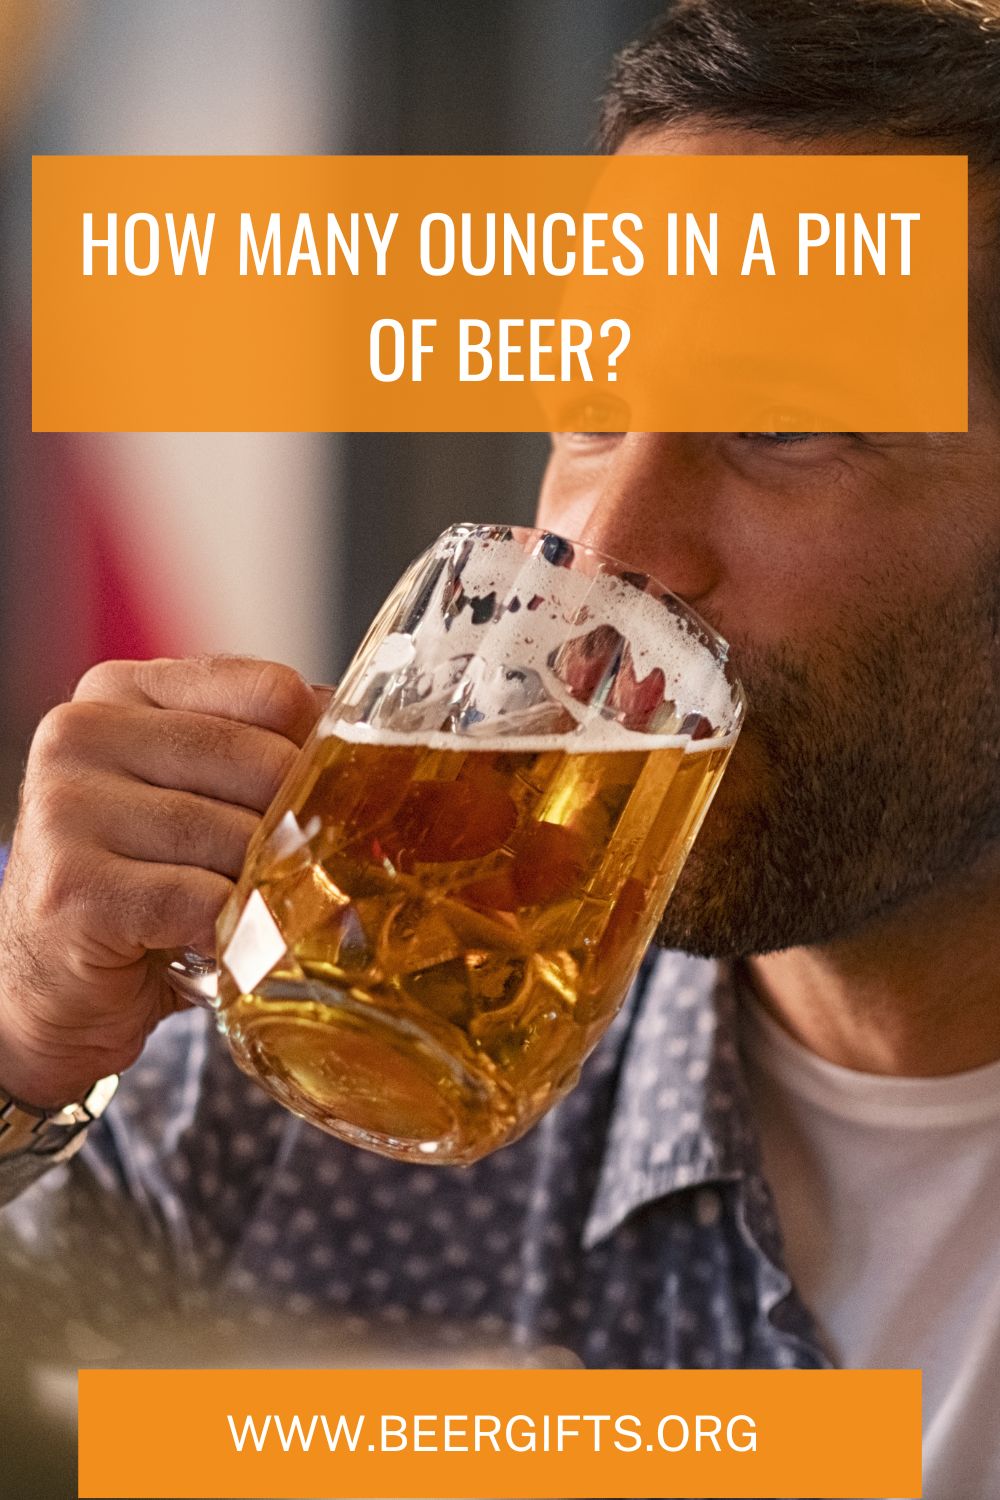 How Many Ounces in a Pint of Beer?2